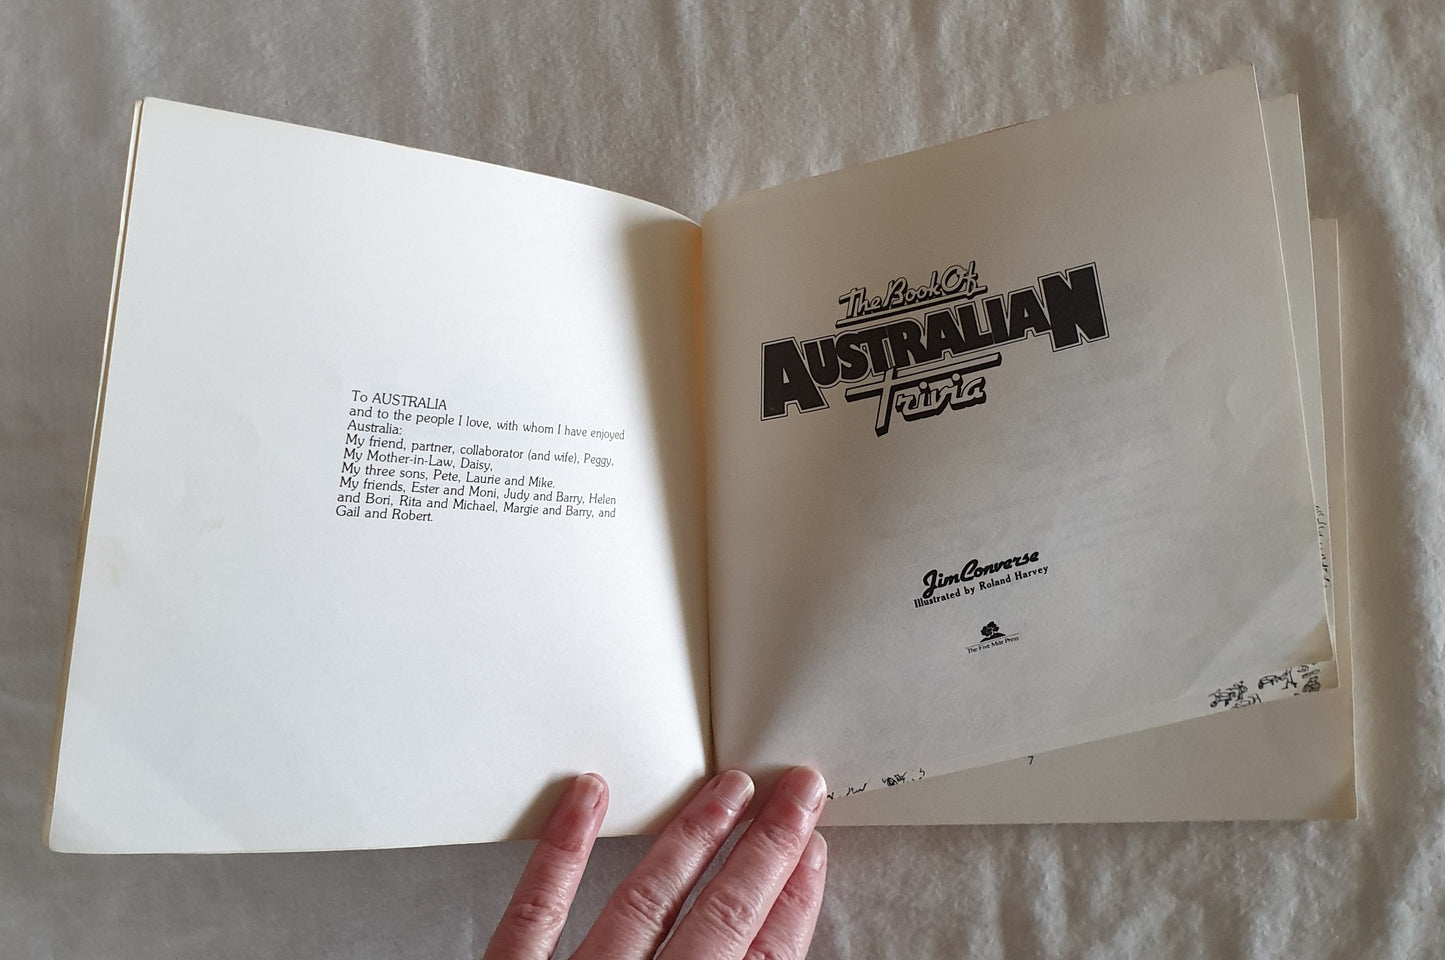 The Book of Australian Trivia by Jim Converse